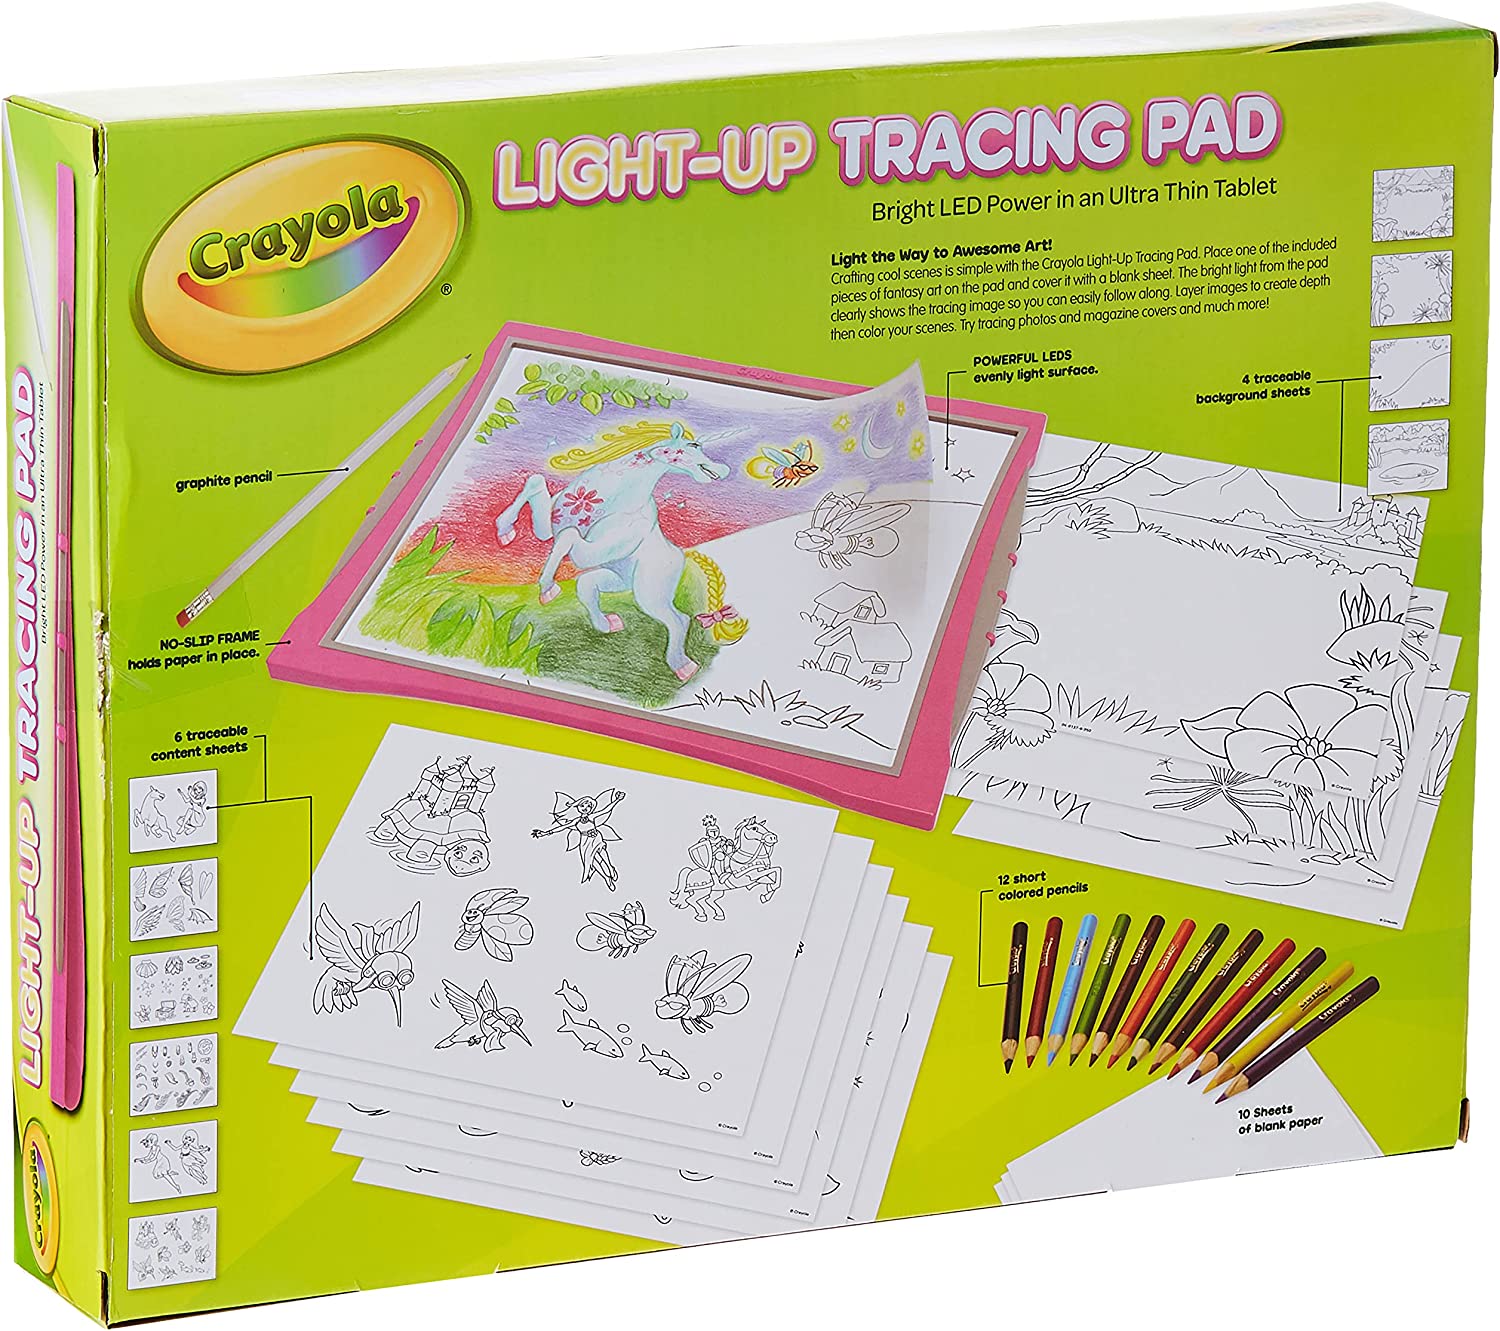 Crayola Light-up Tracing Pad Pink Specialty Paper Child Ages 3+